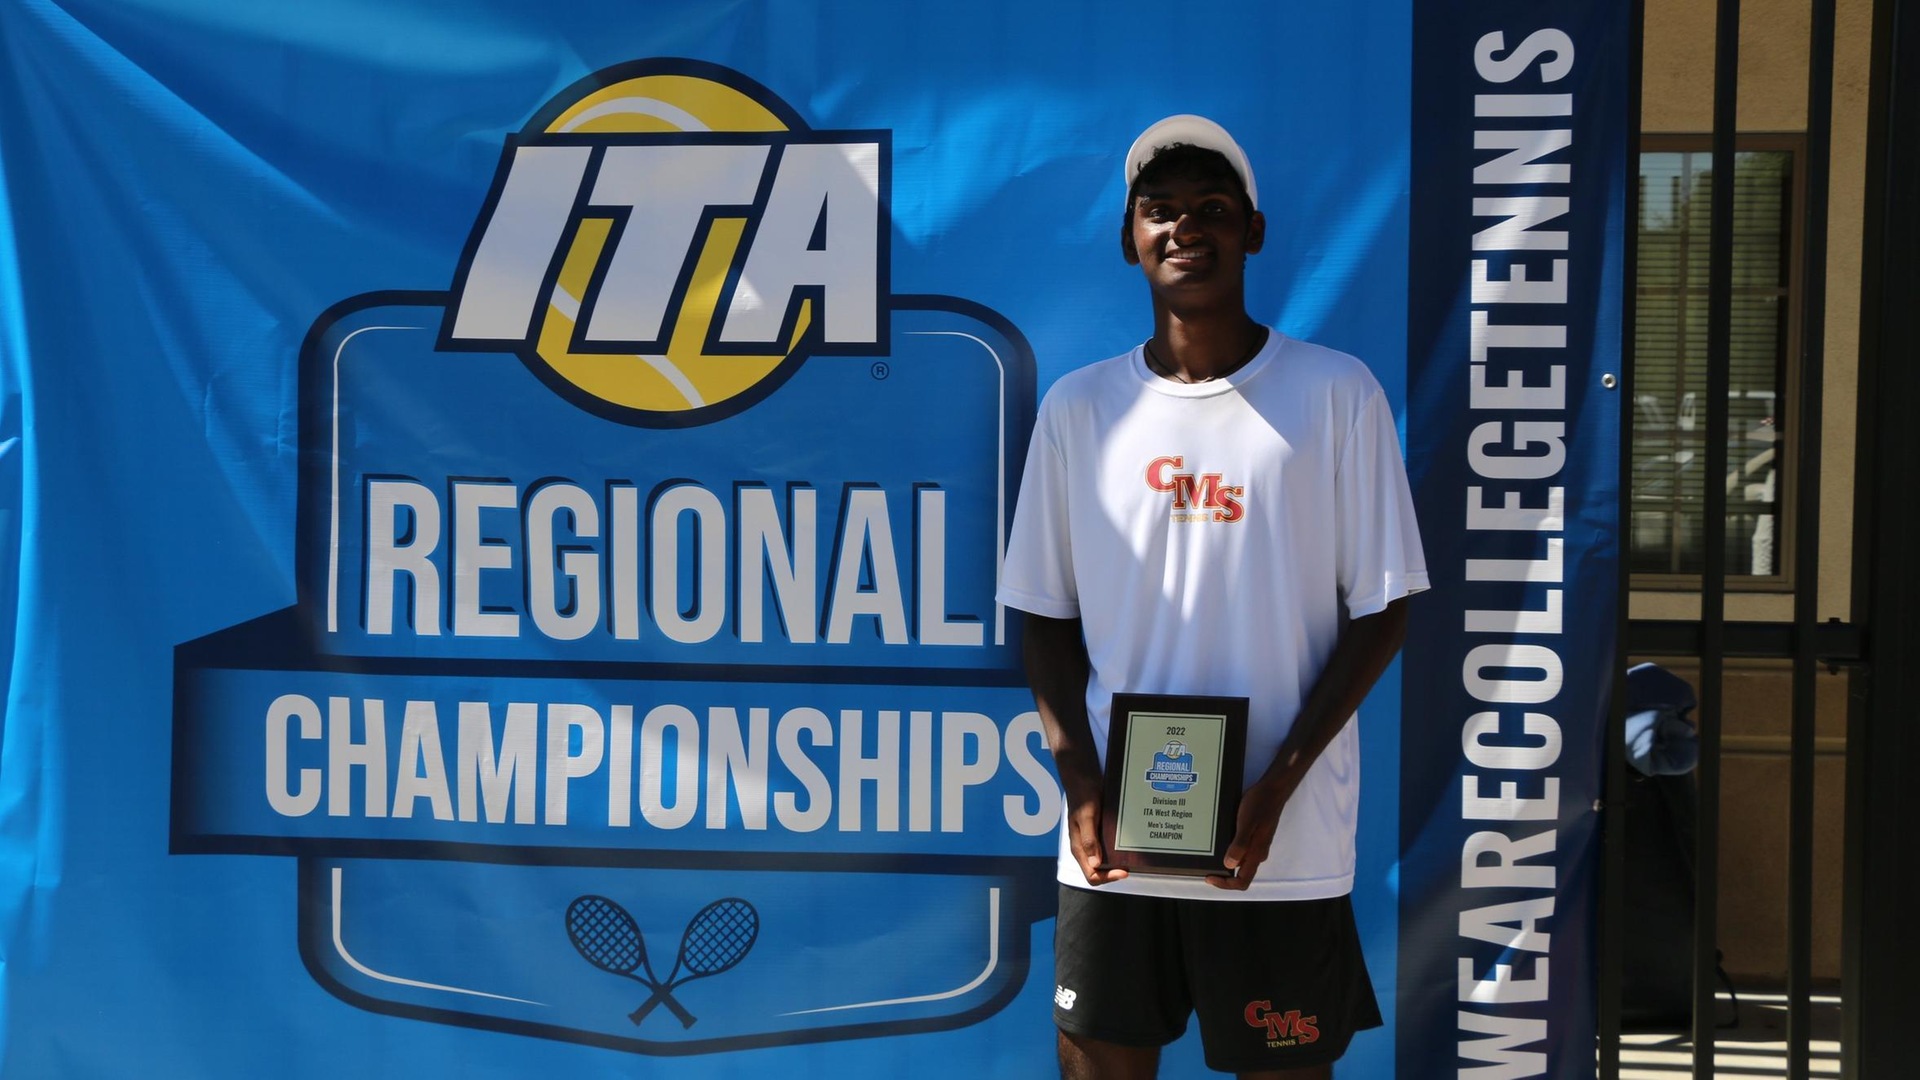 Advik Mareedu will try to win his second straight ITA Regional this weekend